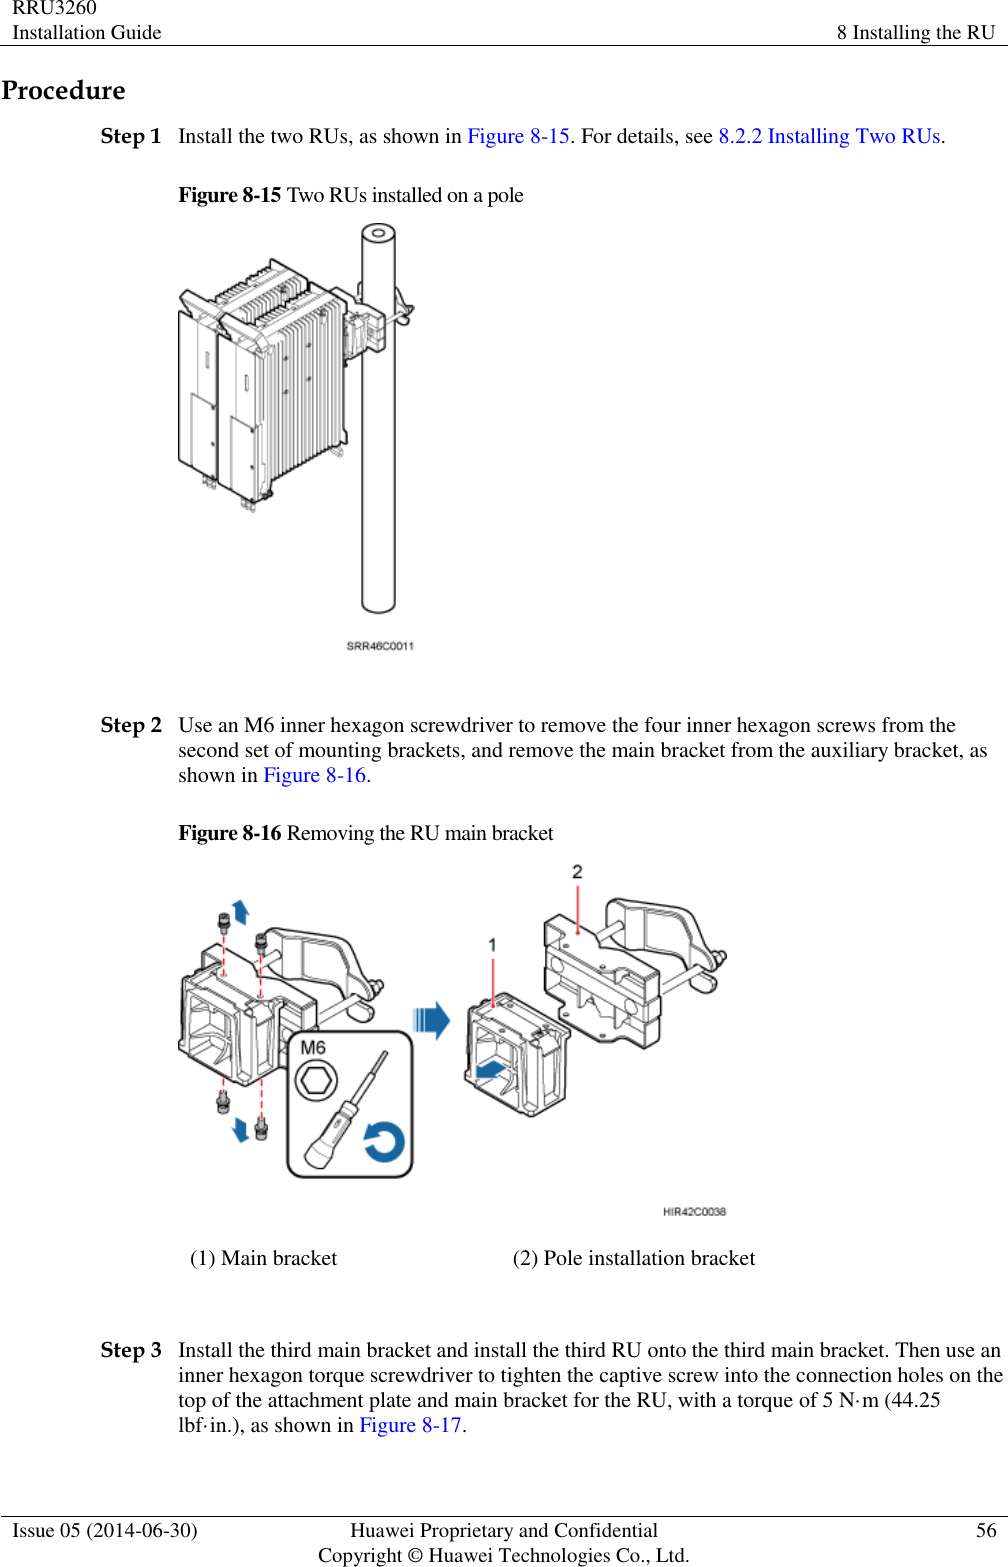 RRU3260 Installation Guide 8 Installing the RU  Issue 05 (2014-06-30) Huawei Proprietary and Confidential                                     Copyright © Huawei Technologies Co., Ltd. 56  Procedure Step 1 Install the two RUs, as shown in Figure 8-15. For details, see 8.2.2 Installing Two RUs. Figure 8-15 Two RUs installed on a pole   Step 2 Use an M6 inner hexagon screwdriver to remove the four inner hexagon screws from the second set of mounting brackets, and remove the main bracket from the auxiliary bracket, as shown in Figure 8-16. Figure 8-16 Removing the RU main bracket  (1) Main bracket (2) Pole installation bracket  Step 3 Install the third main bracket and install the third RU onto the third main bracket. Then use an inner hexagon torque screwdriver to tighten the captive screw into the connection holes on the top of the attachment plate and main bracket for the RU, with a torque of 5 N·m (44.25 lbf·in.), as shown in Figure 8-17. 